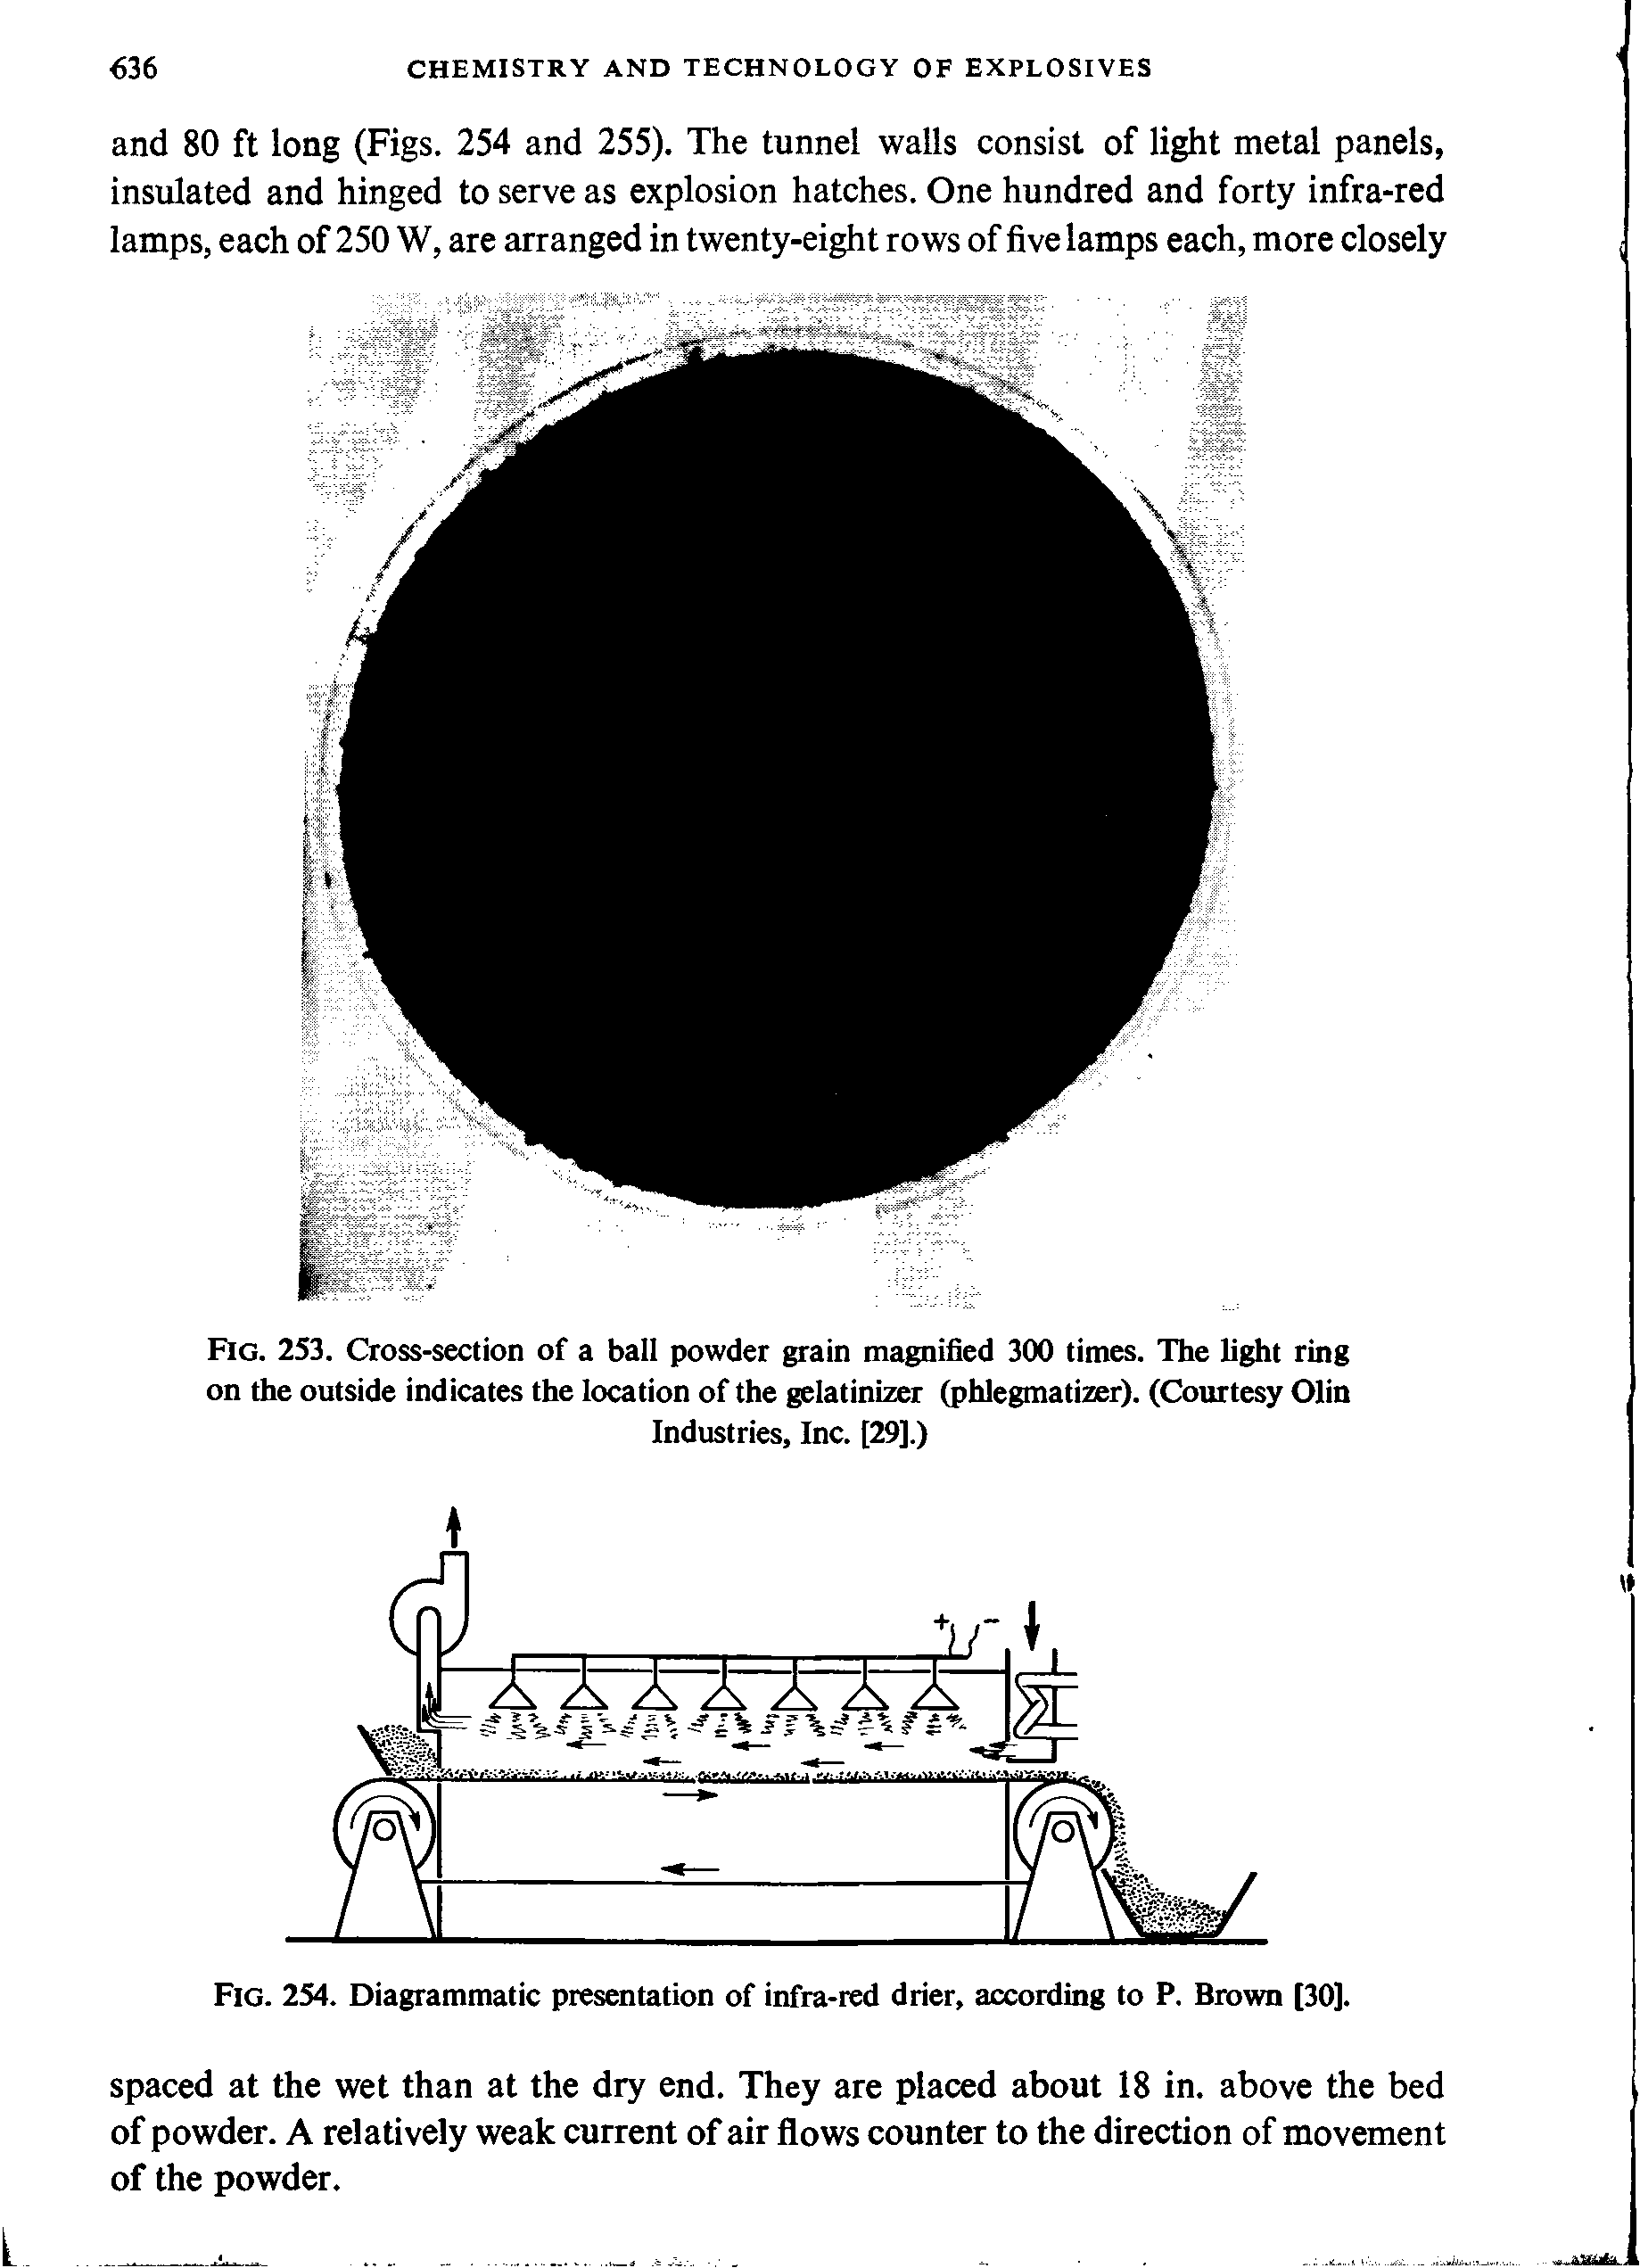 Fig. 253. Cross-section of a ball powder grain magnified 300 times. The light ring on the outside indicates the location of the gelatinizer (phlegmatizer). (Courtesy Olin...